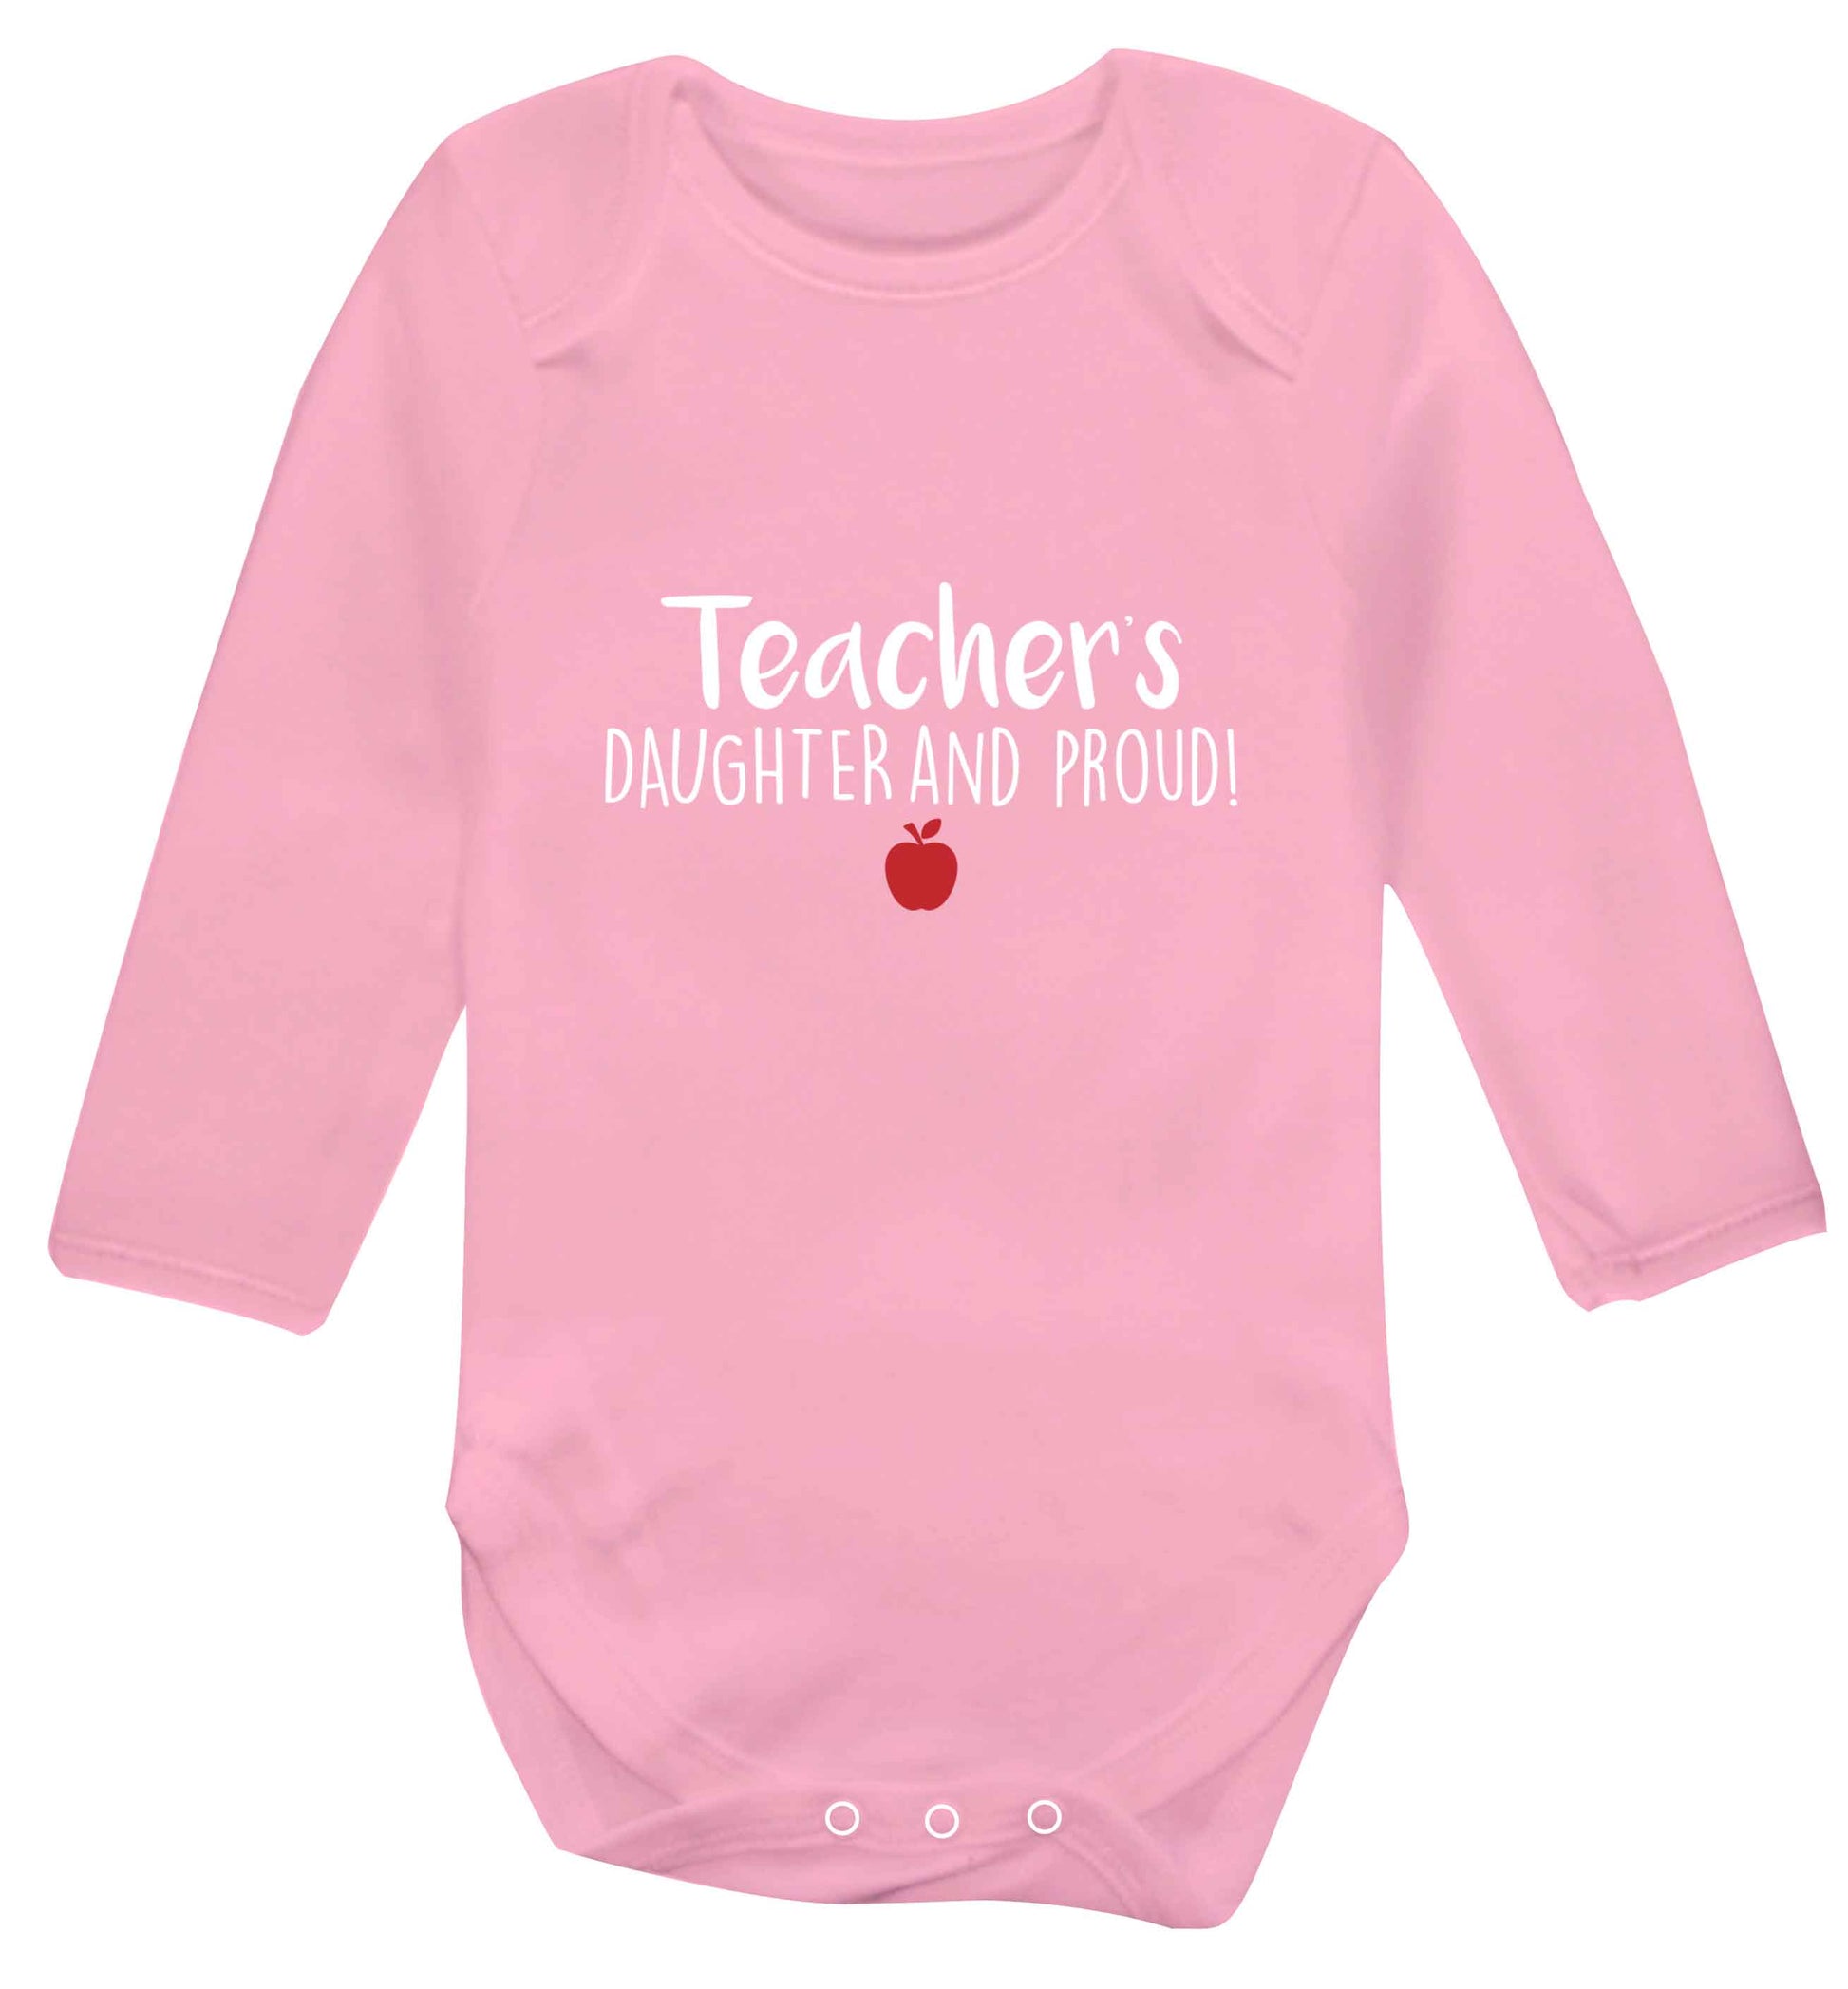 Teachers daughter and proud baby vest long sleeved pale pink 6-12 months